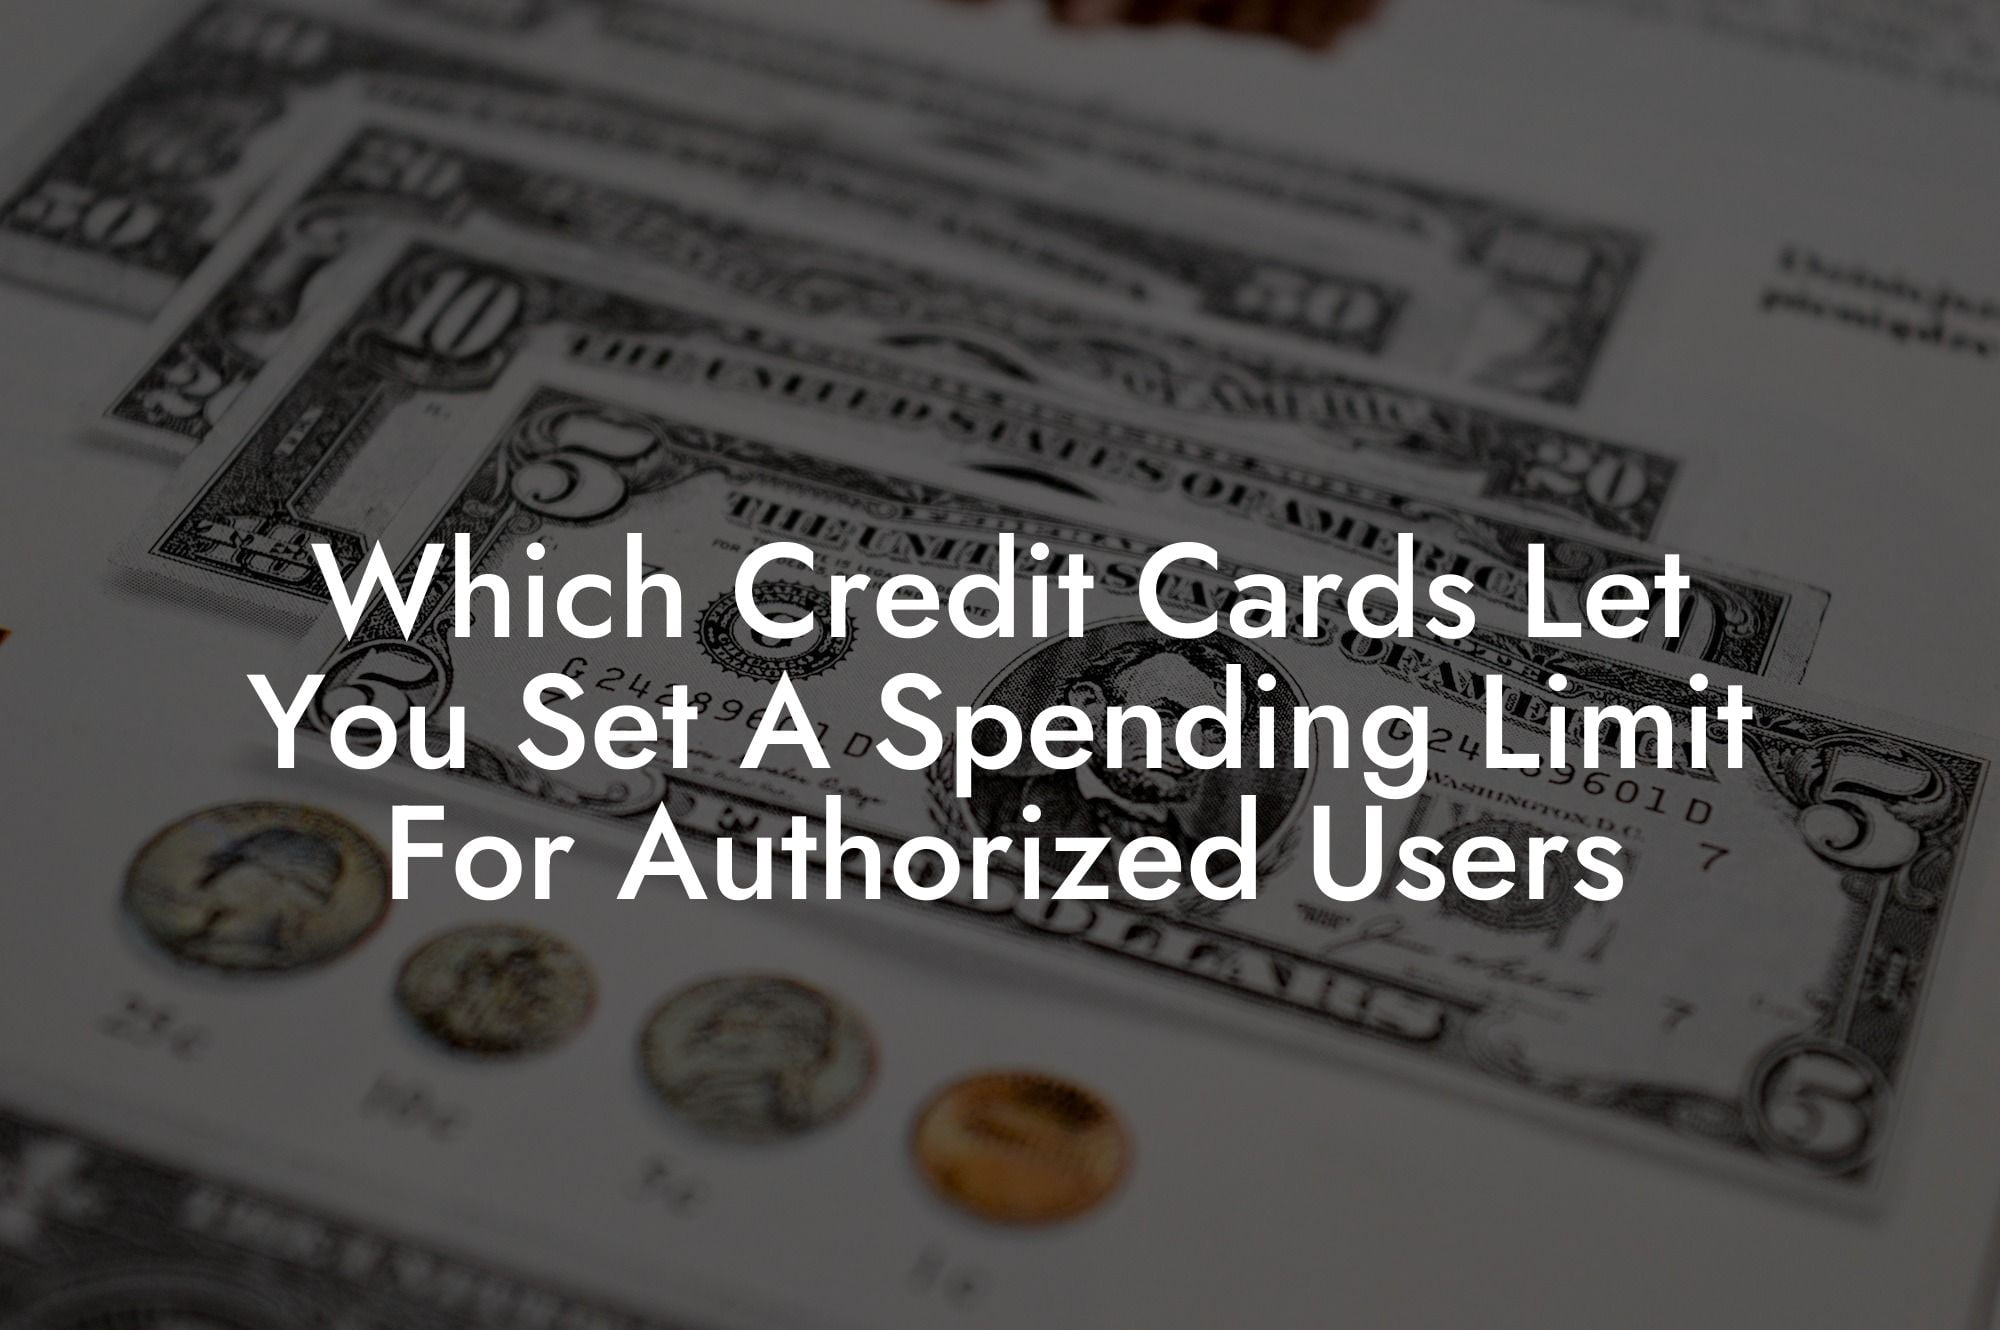 Which Credit Cards Let You Set A Spending Limit For Authorized Users